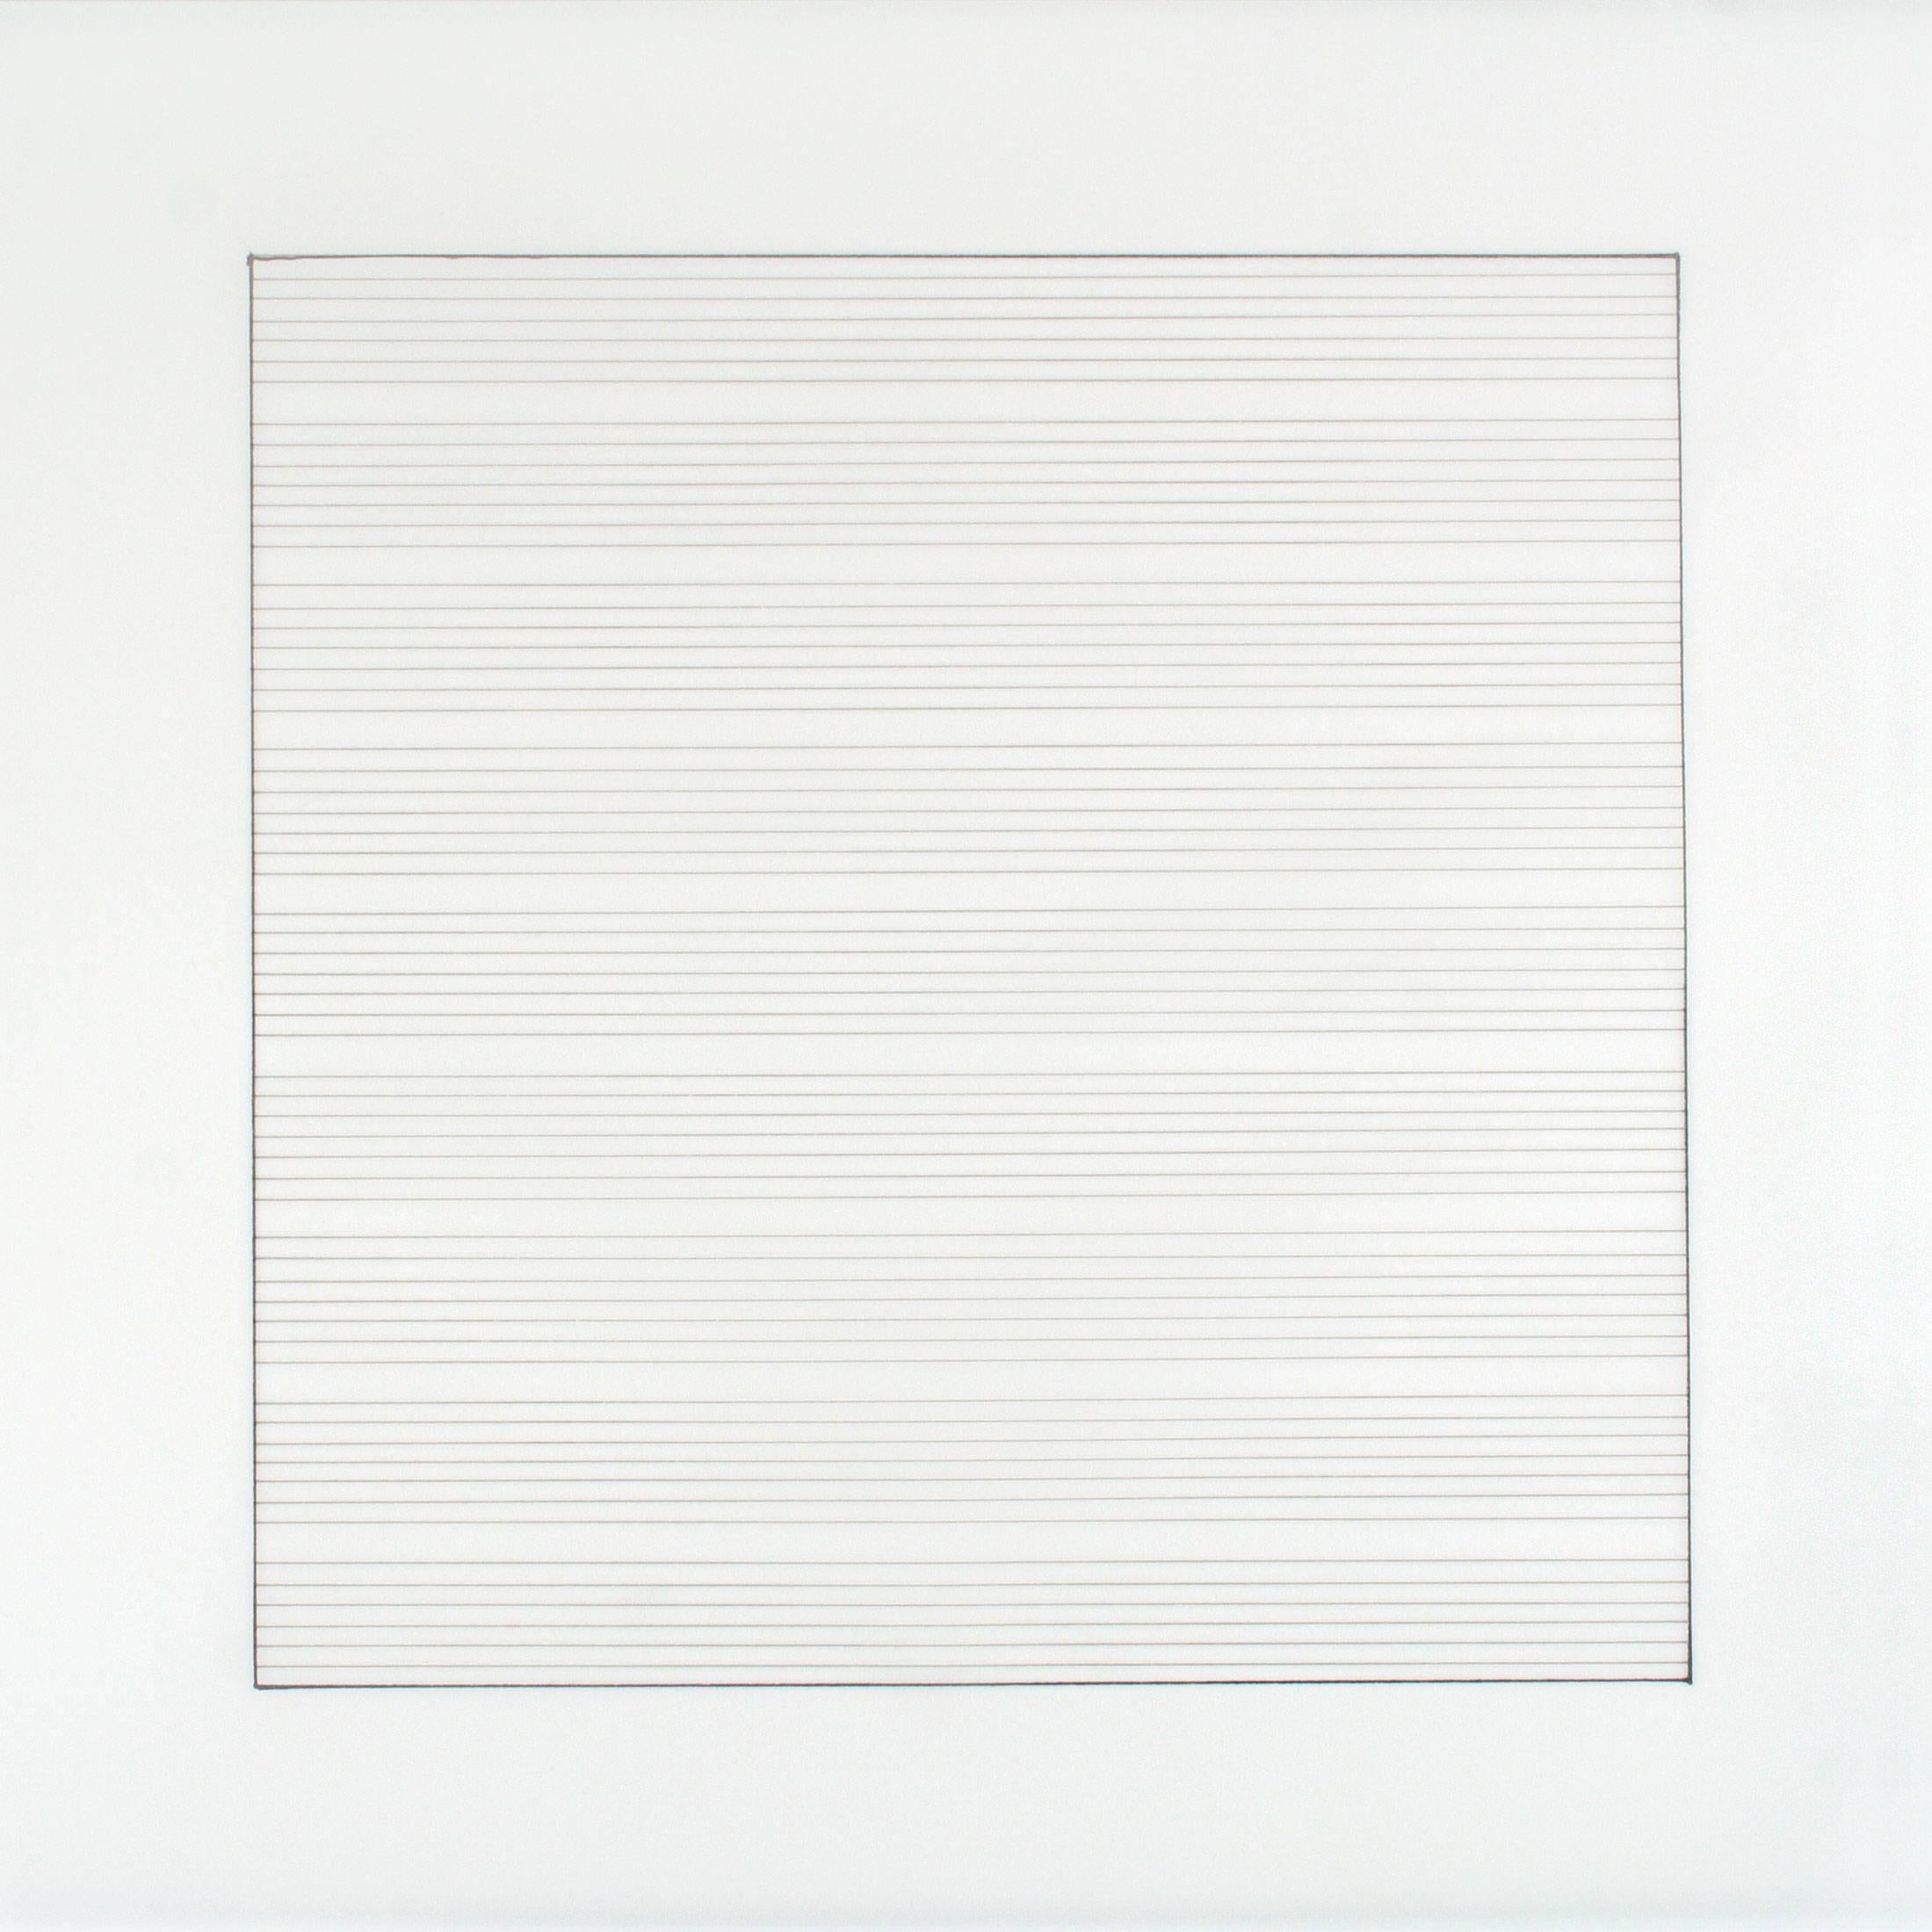 AGNES MARTIN. Paintings and Drawings 1974-1990 3